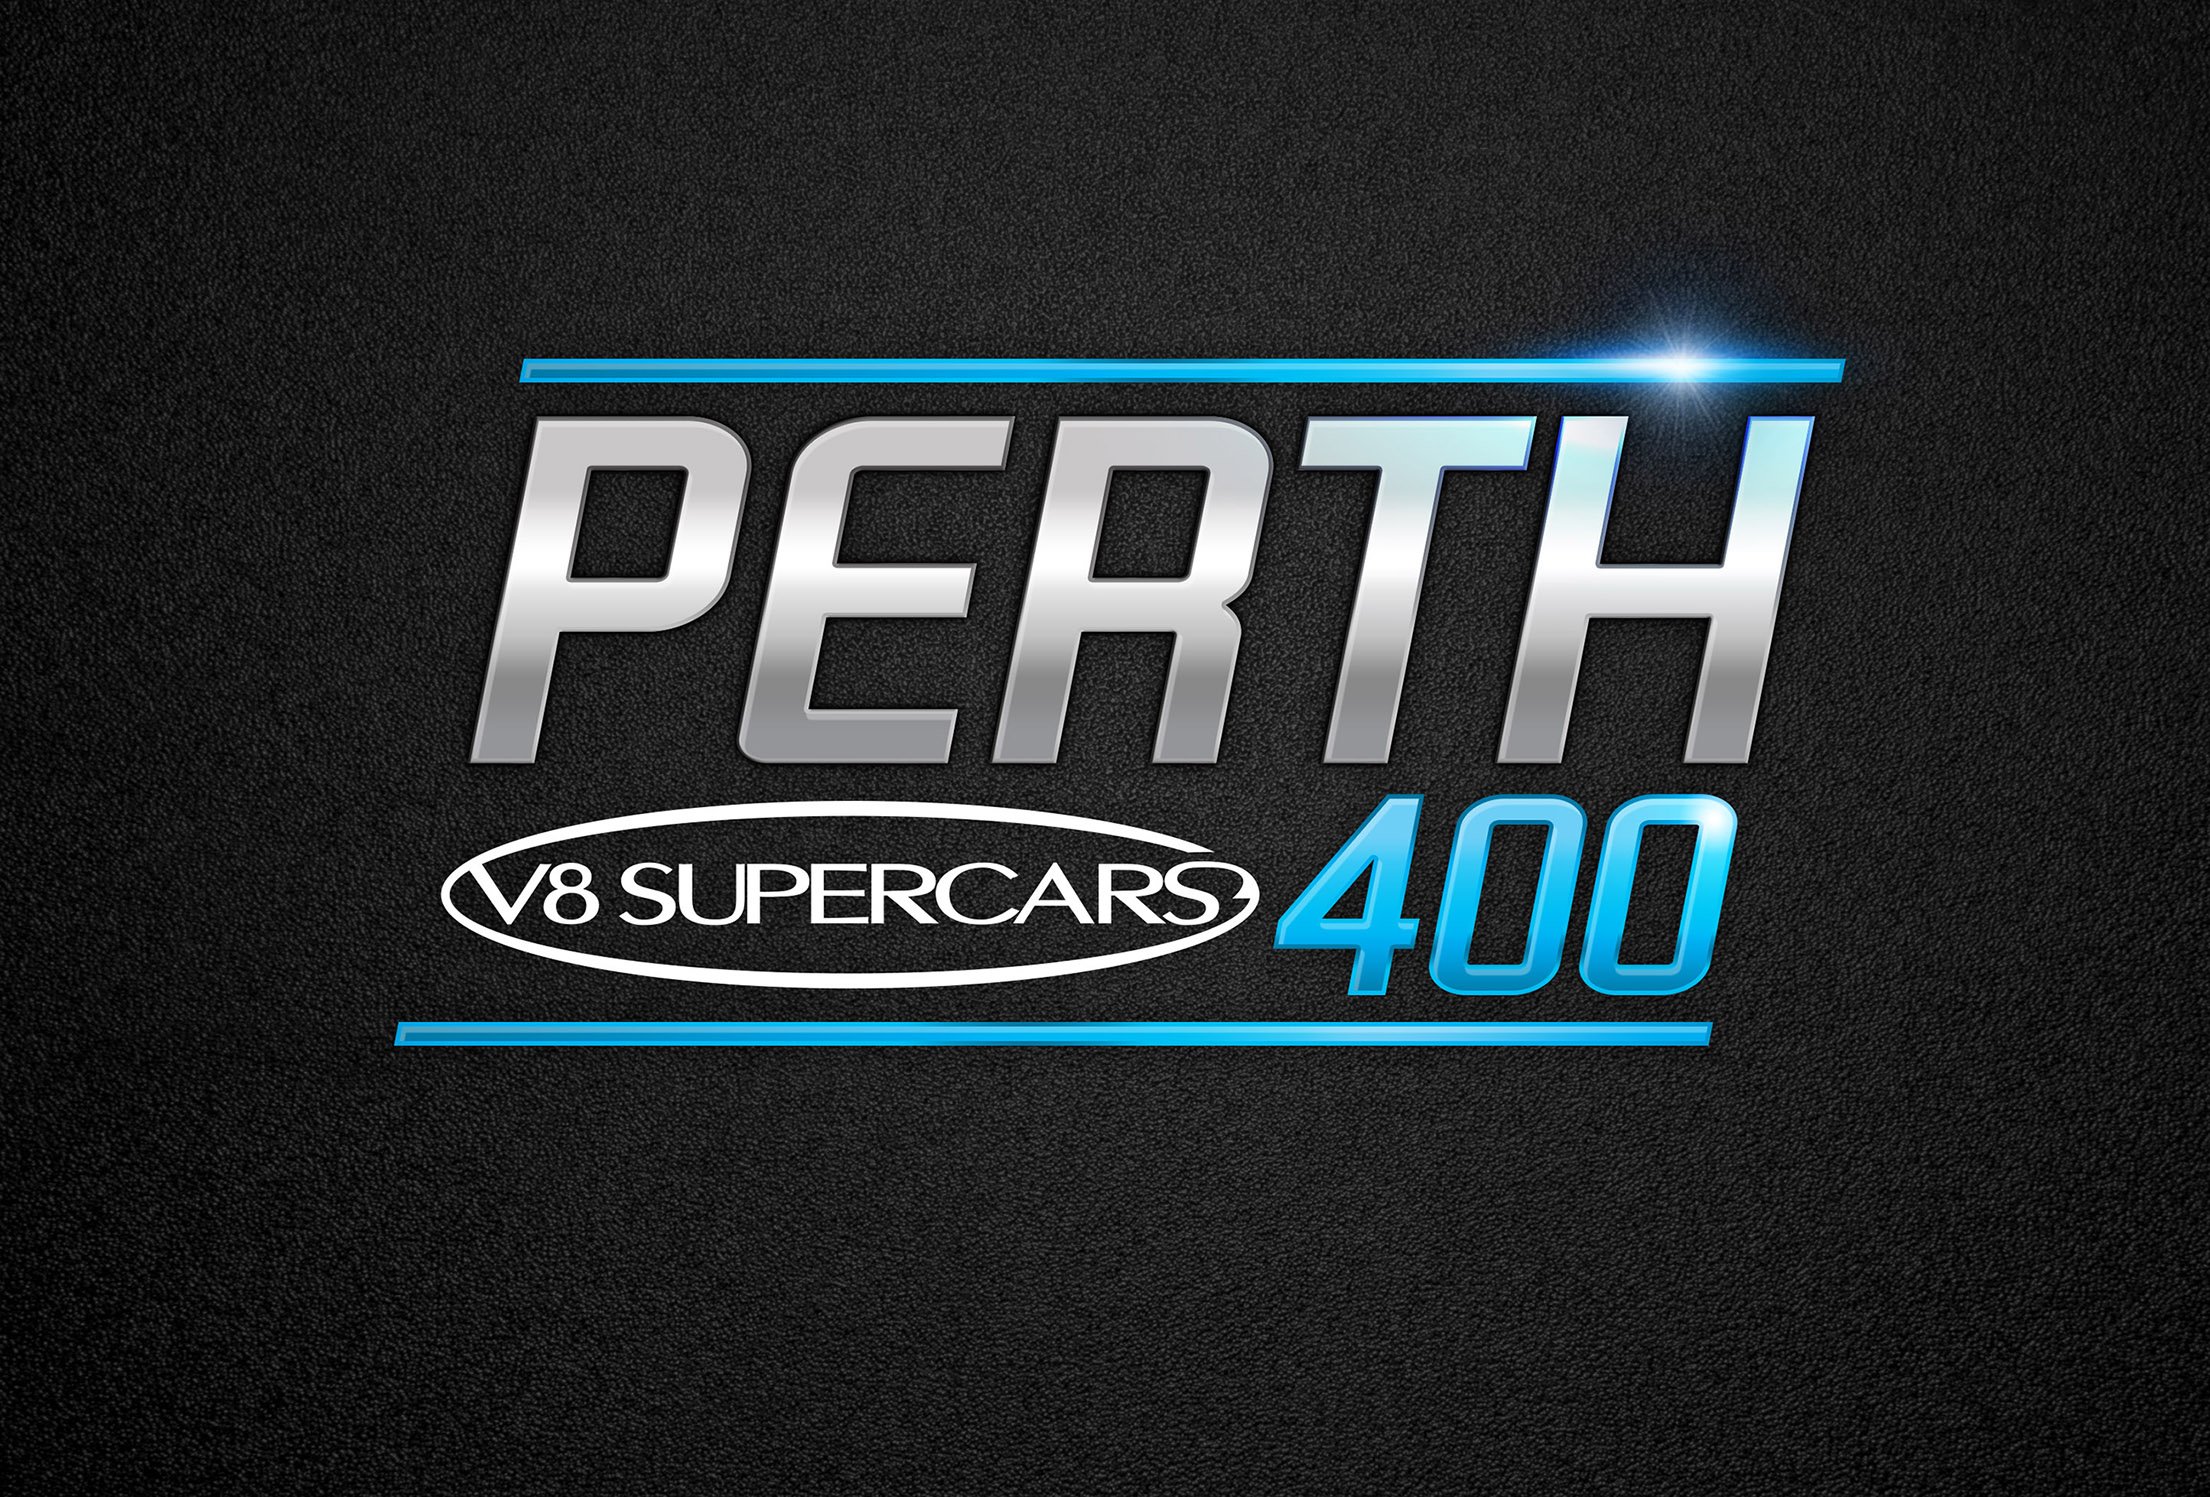 aussie, V 8, Supercars, Race, Racing, Poster Wallpaper